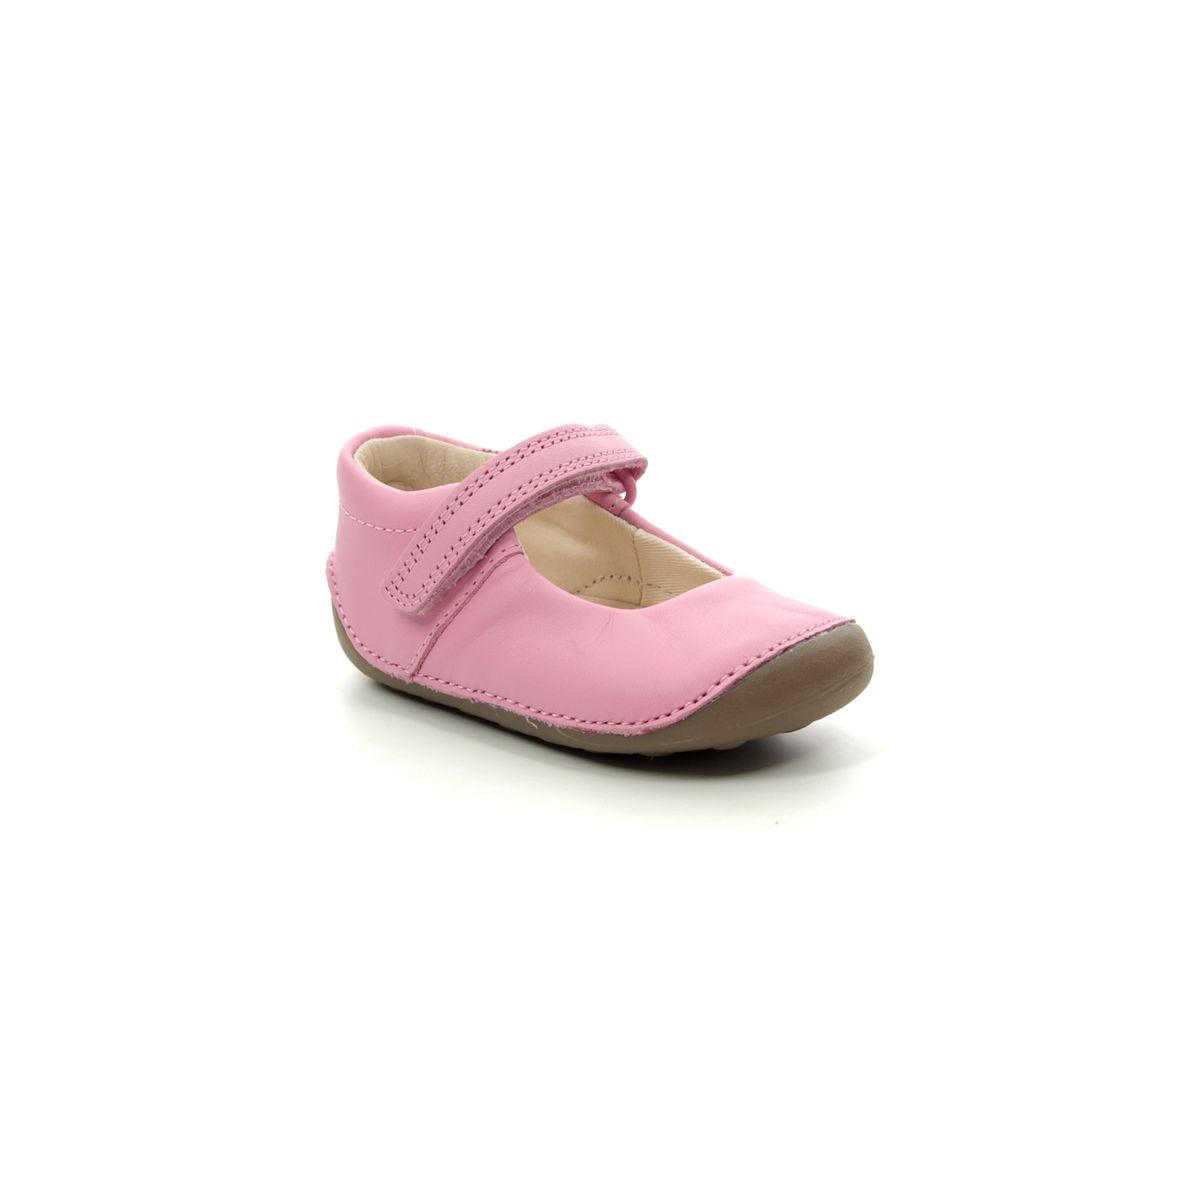 Clarks Tiny T G Fit Pink Leather girls first and baby shoes